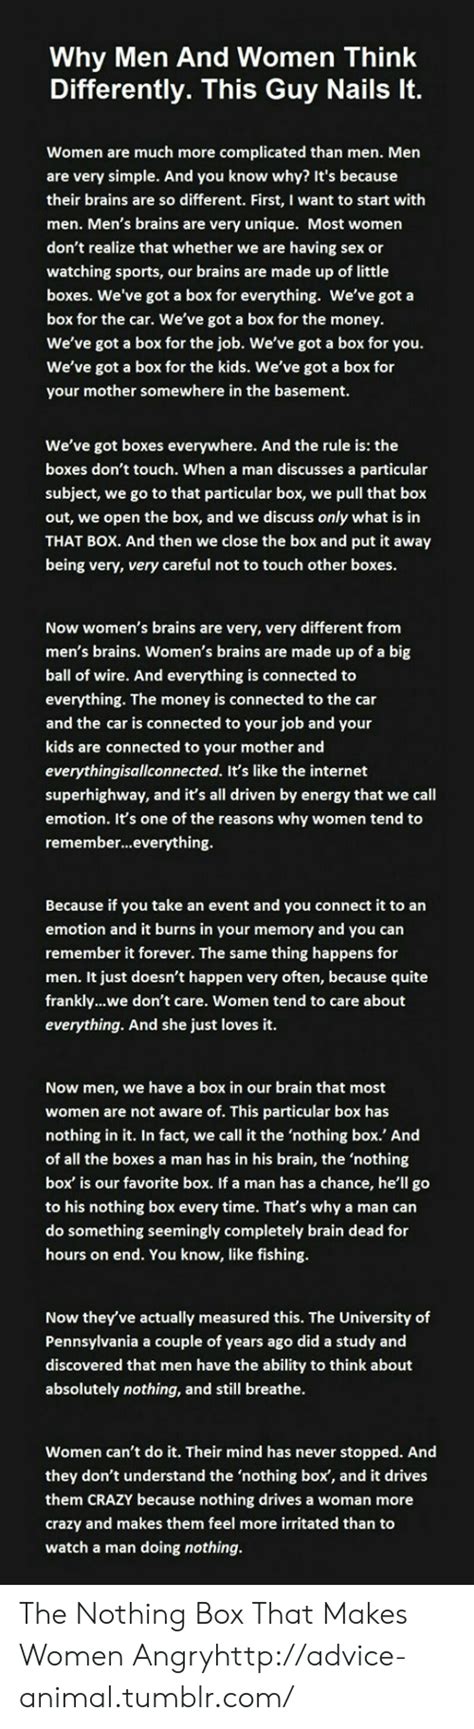 why men and women think differently this guy nails it